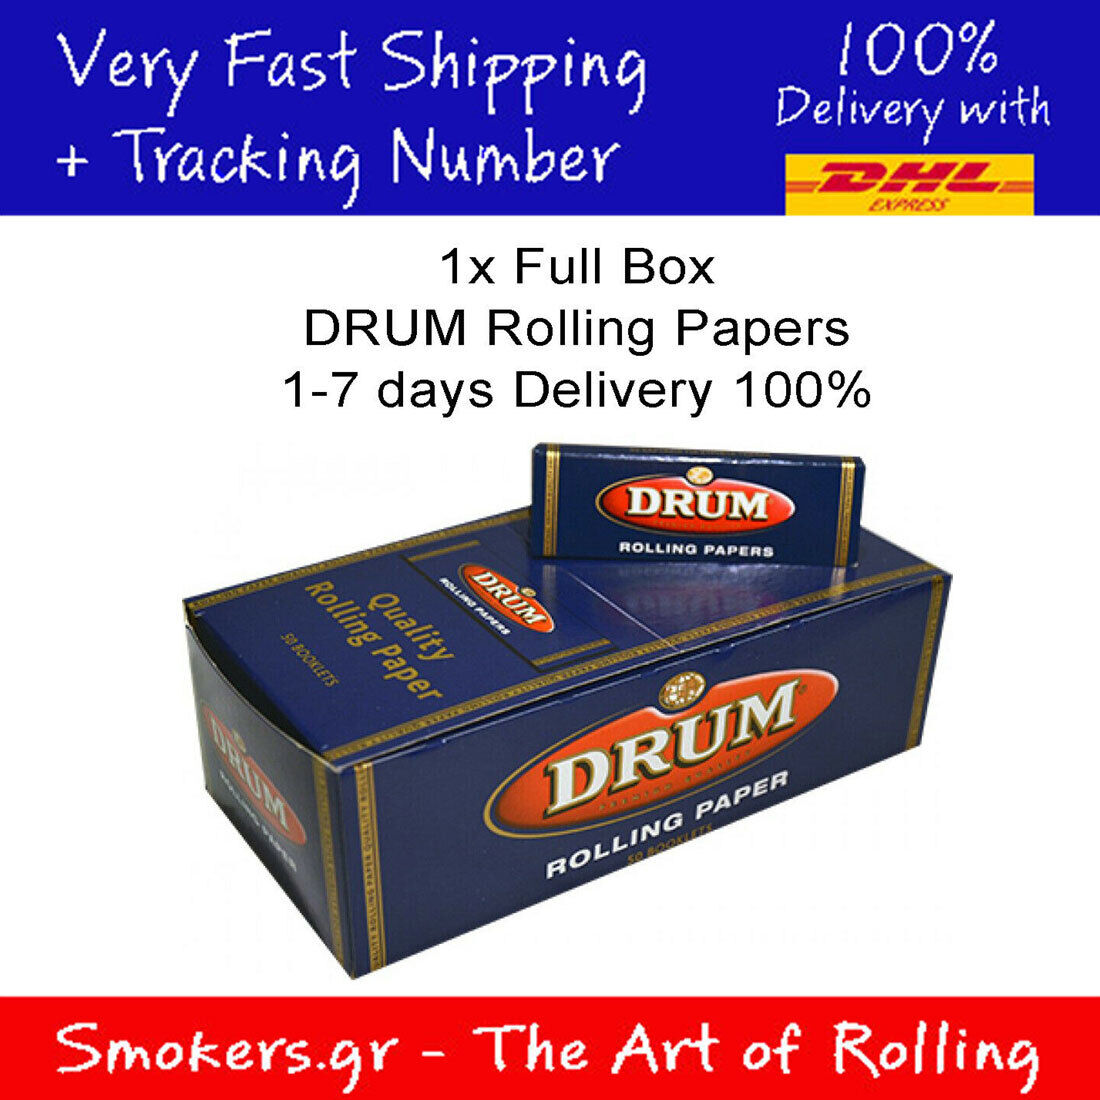 1x FULL BOX DRUM Rolling Papers ( 50 Booklets in Box ) -- SUPER DELIVERY TIME